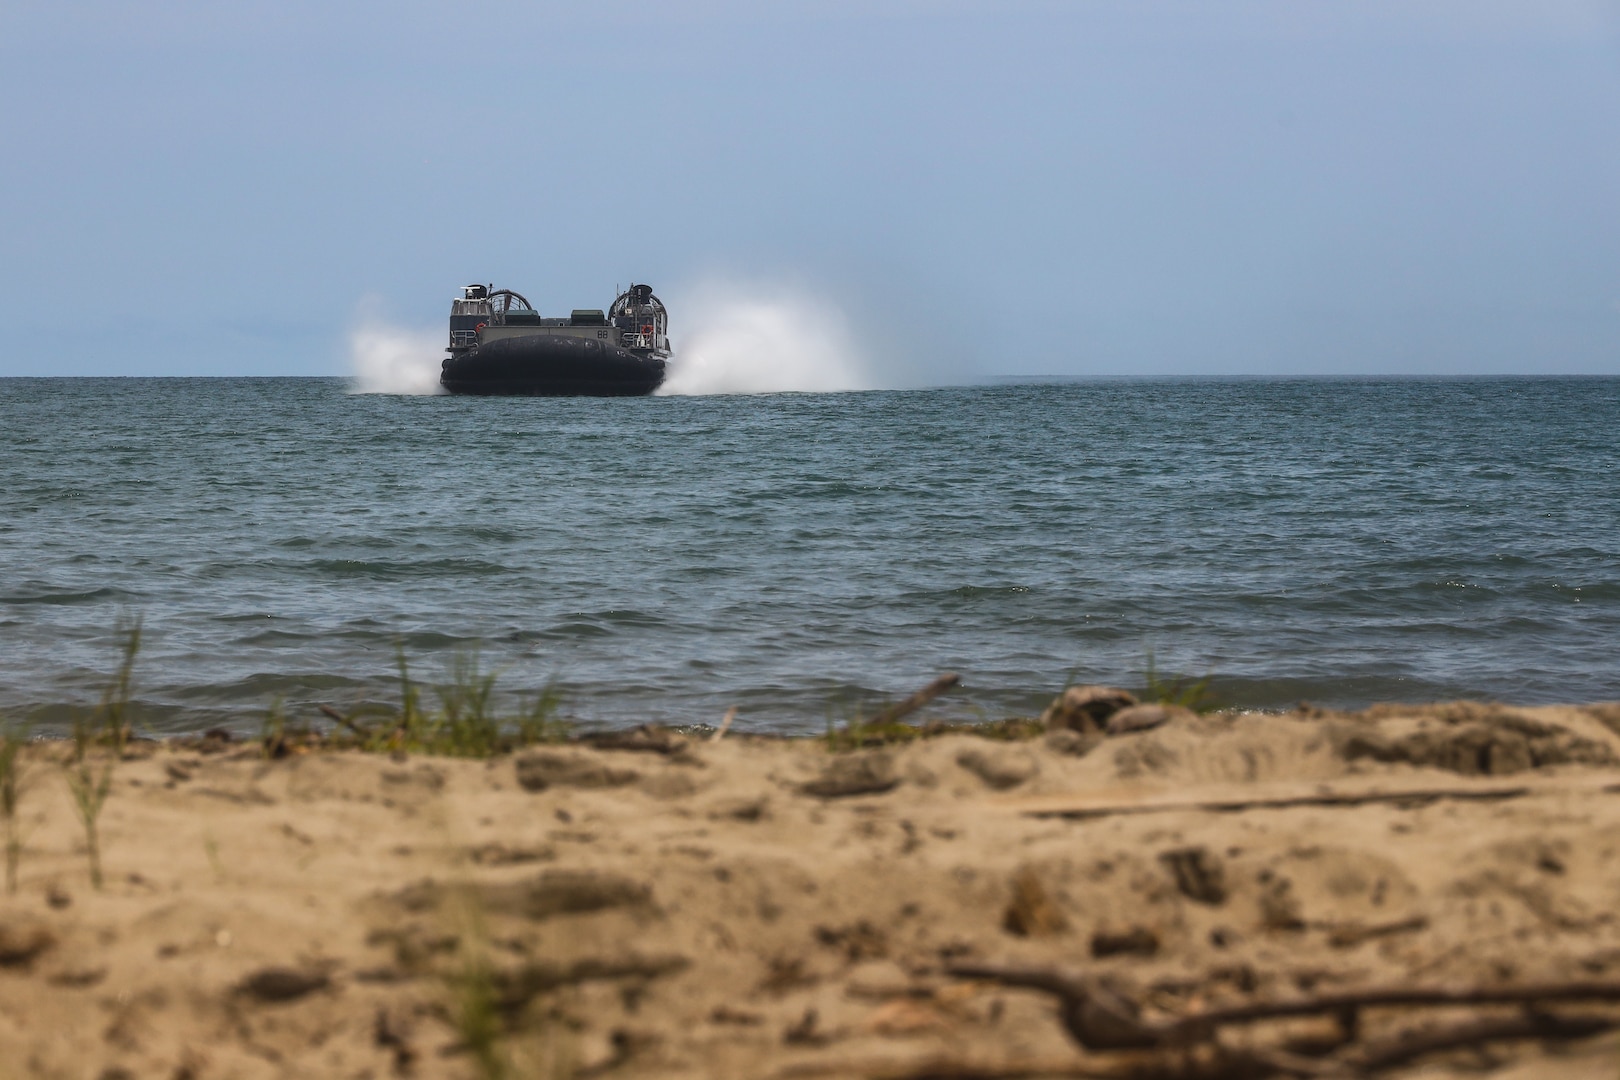 U.S. Navy Landing Craft Air Cushion (LCAC) 88 approaches a beach in Coveñas, Colombia, July 8, 2023, during a beach landing exercise for UNITAS LXIV.